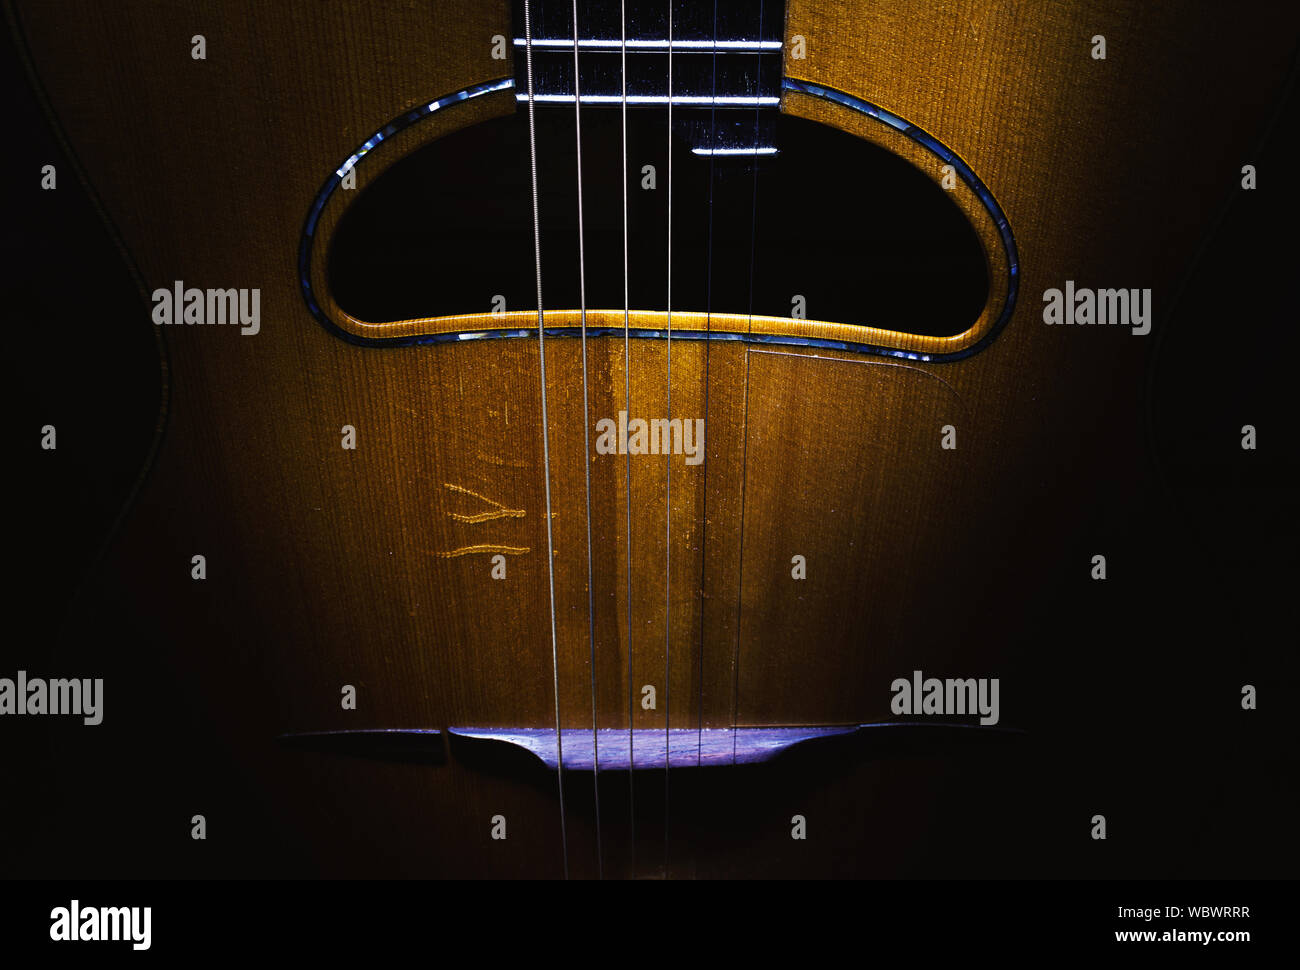 Details of an old and dusty gypsy jazz acoustic guitar, Django style. Stock Photo